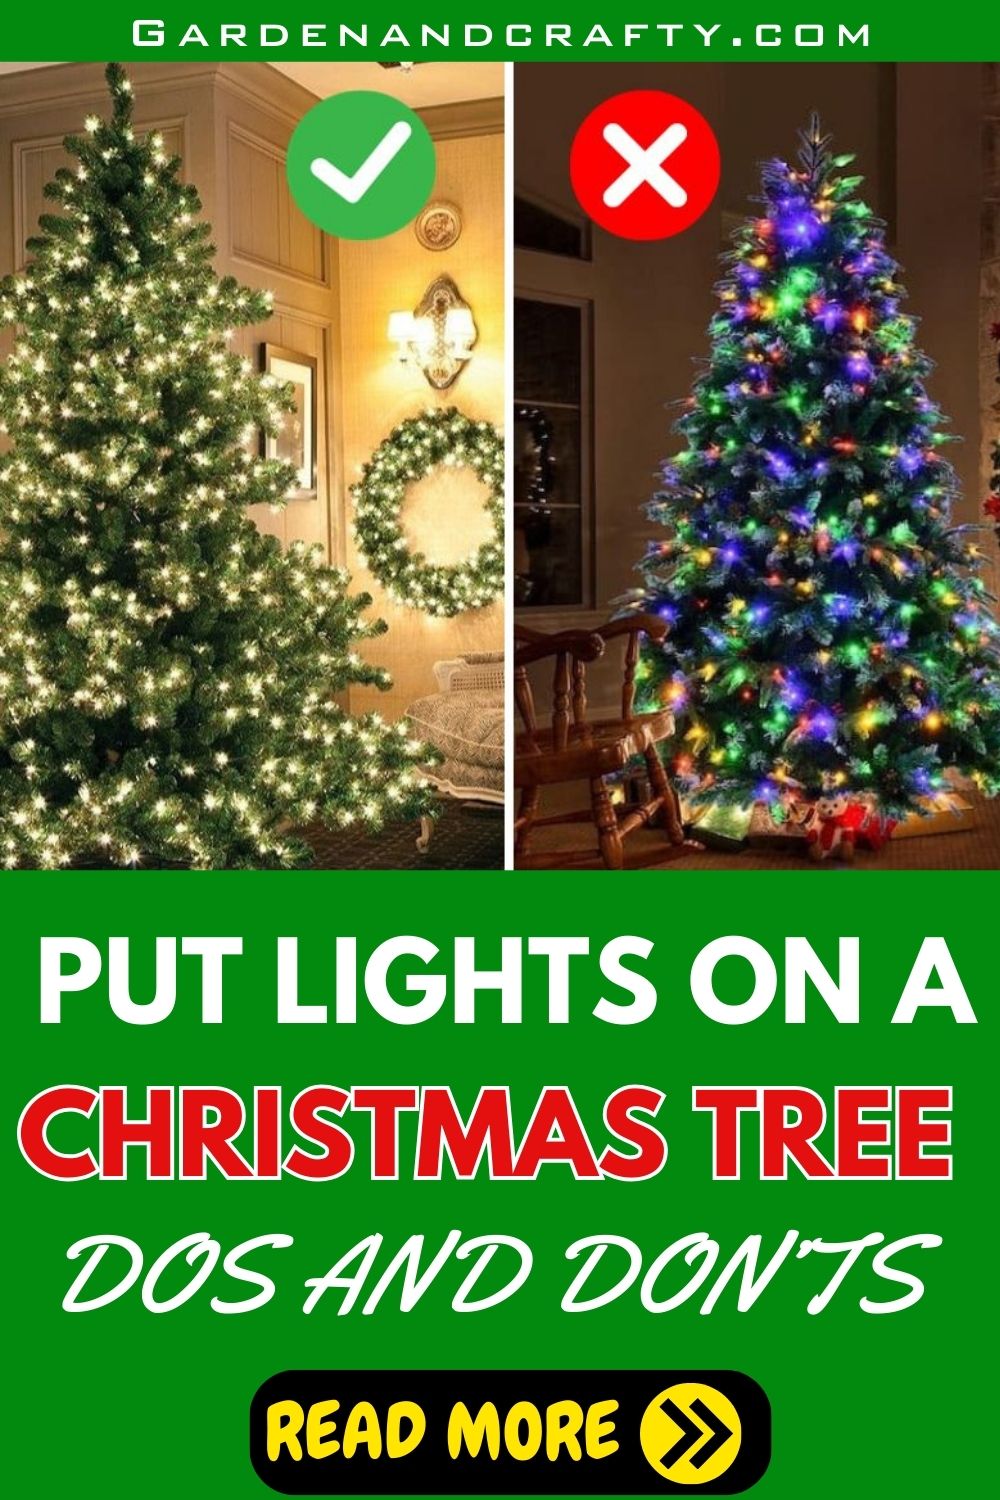 Putting Lights On A Christmas Tree: 5 Dos And 4 Don'ts You Should Follow